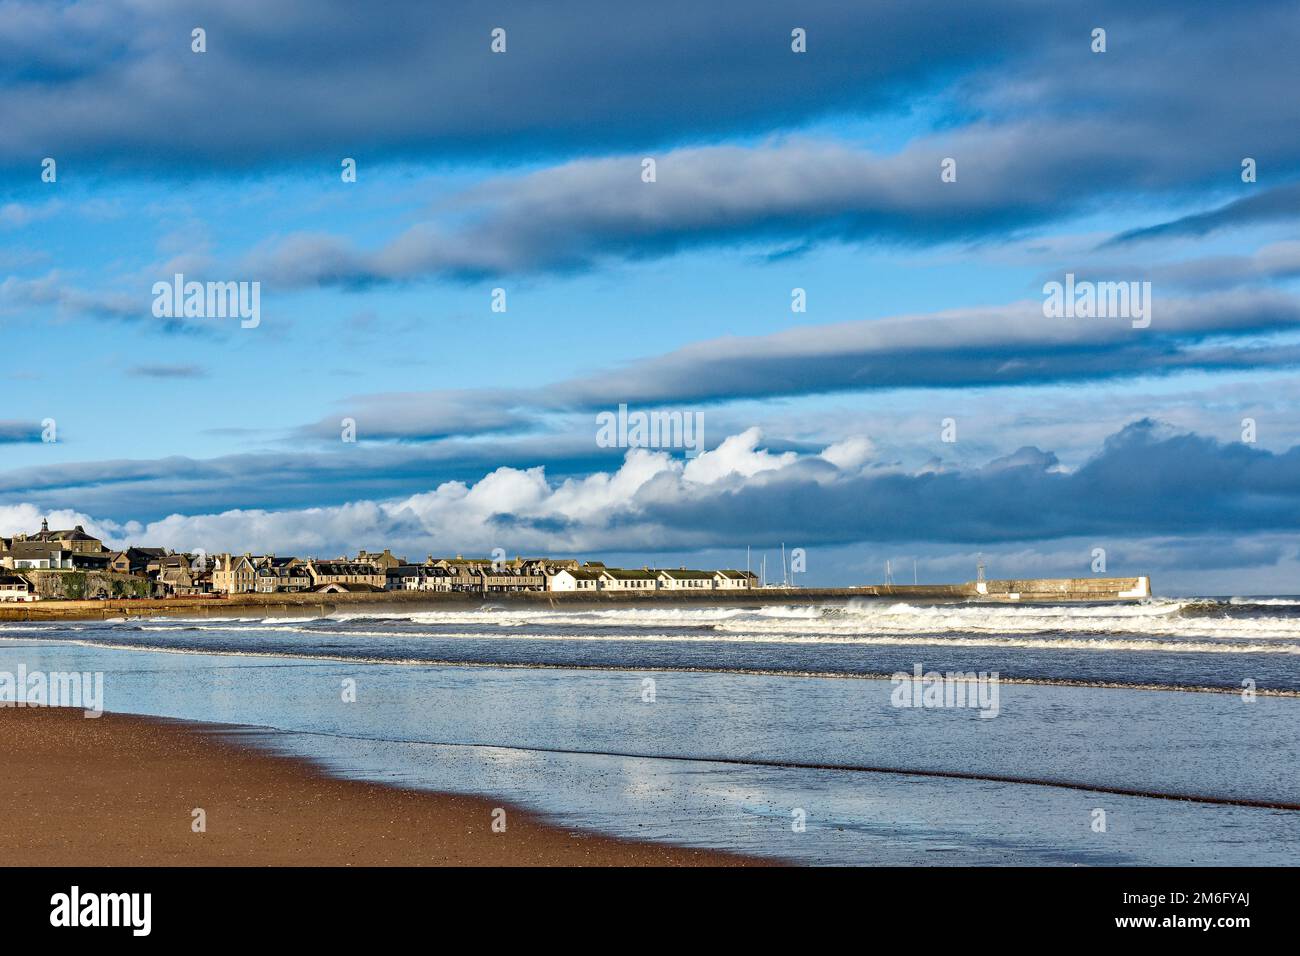 Lossiemouth East Beach Moray coast Scotland houses and harbour walls seen from the beach in winter Stock Photo